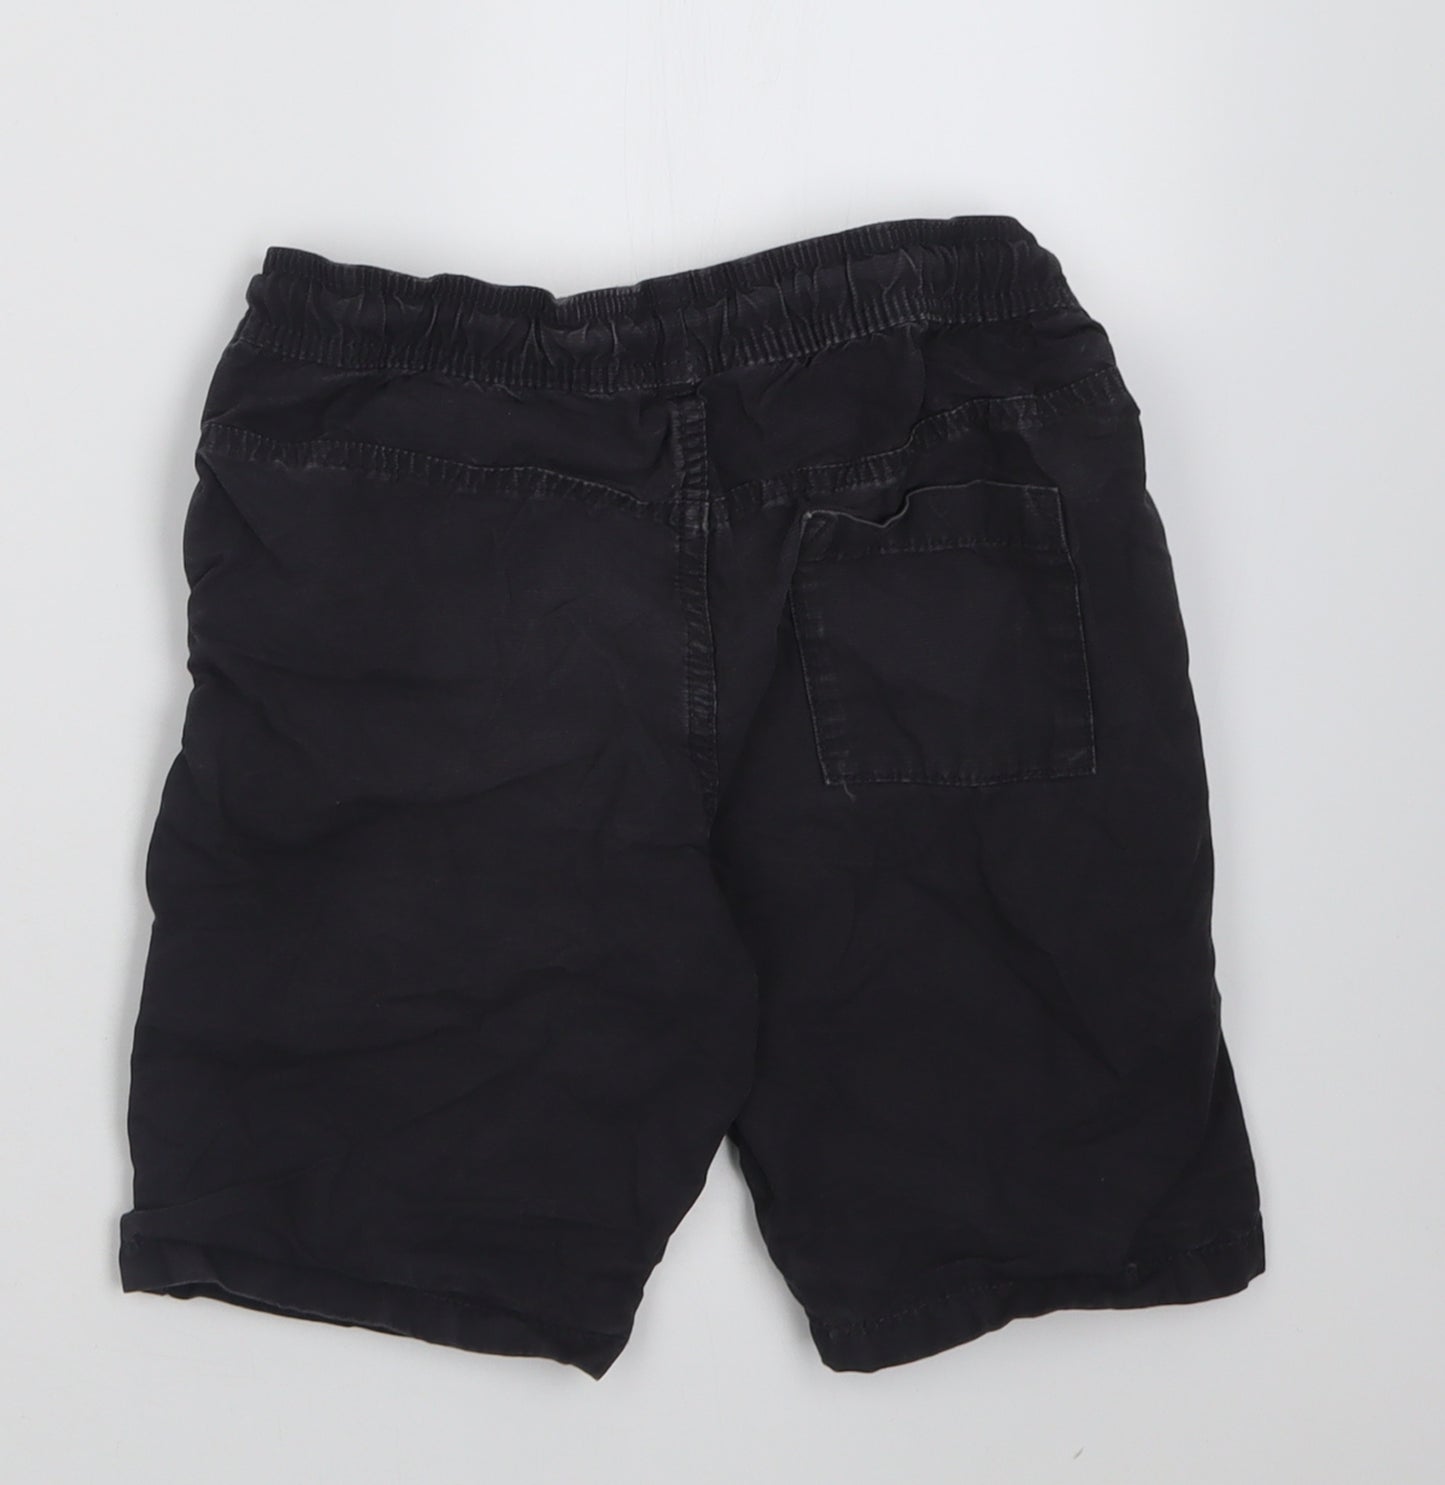 Marks and Spencer Boys Black  Cotton Bermuda Shorts Size 8-9 Years  Regular Tie